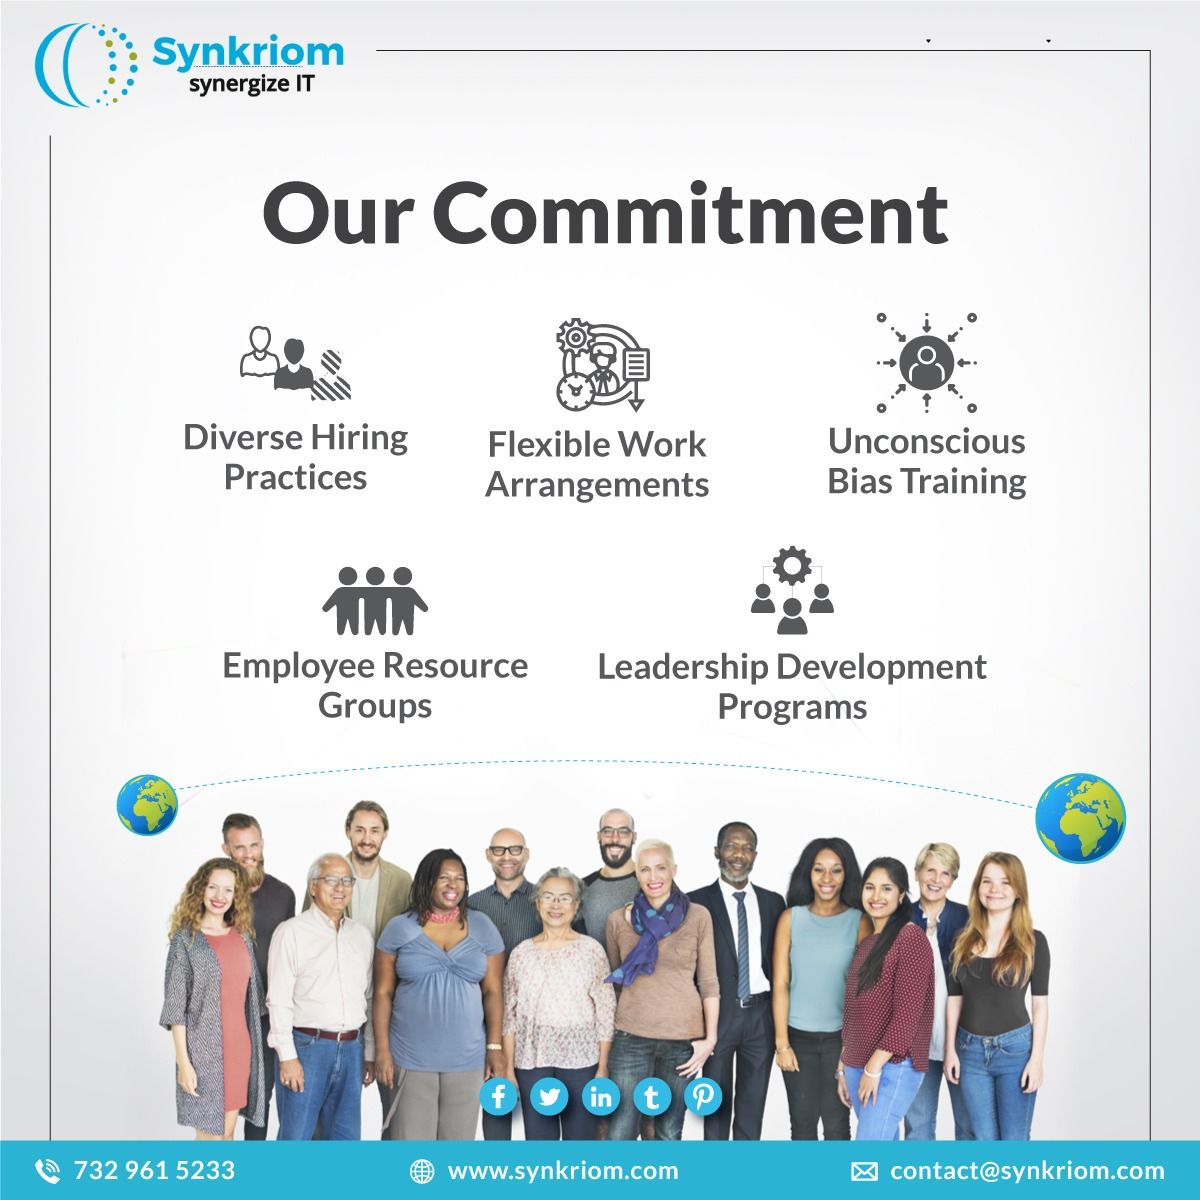 Synkriom can help businesses stay ahead of the curve by identifying and engaging top talent before they are on the job market. 

bit.ly/3uwZs9C

#synkriom #diversity #inclusion #diversityinclusion